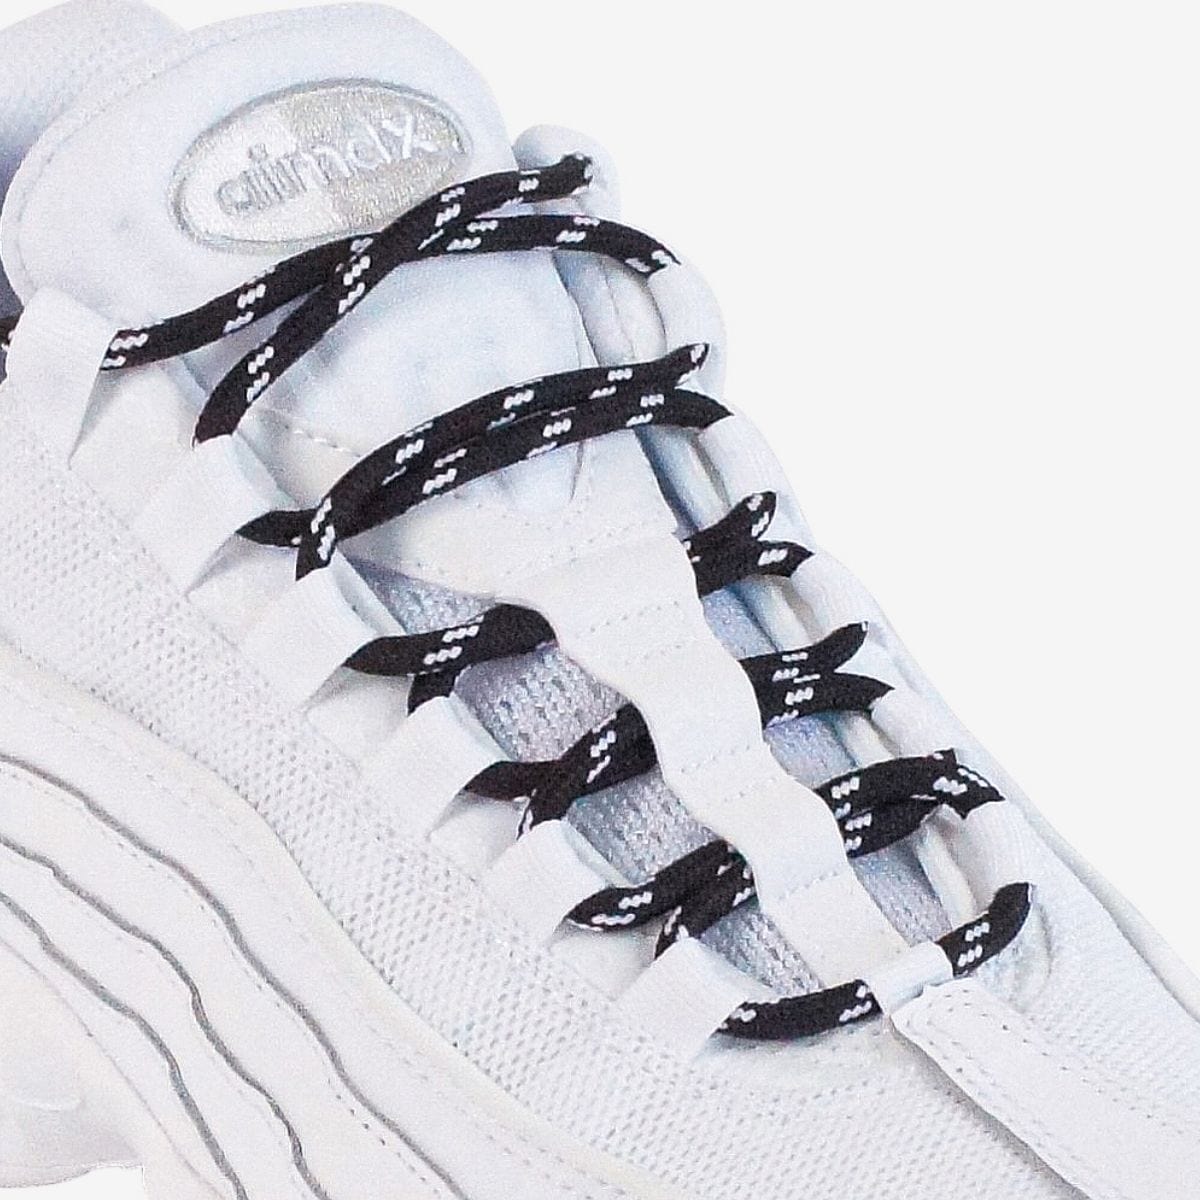 walking-shoe-laces-online-in-australia-colour-black-and-white